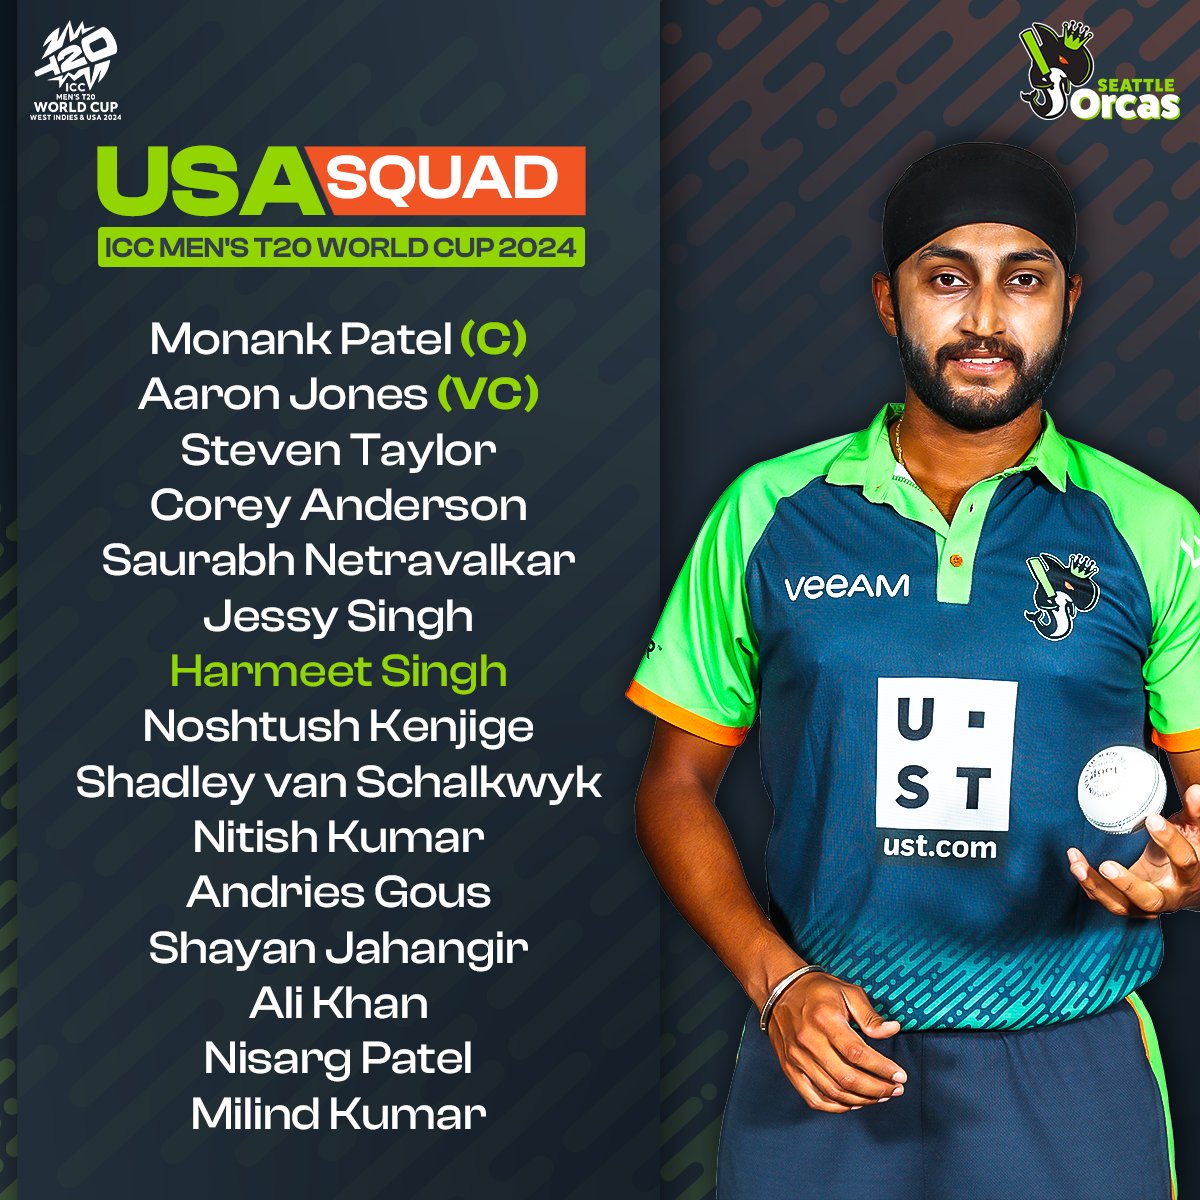 𝐓𝐡𝐞 𝐮𝐧𝐬𝐭𝐨𝐩𝐩𝐚𝐛𝐥𝐞 𝐟𝐨𝐫𝐜𝐞𝐬 for the host nation have landed 🛬 

#Podsquad, here are the members of the USA #T20WorldCup squad - drop in your best wishes 🏏🇺🇸

#SeattleOrcas #MajorLeagueCricket #AmericasFavoriteCricketTeam #AFCT